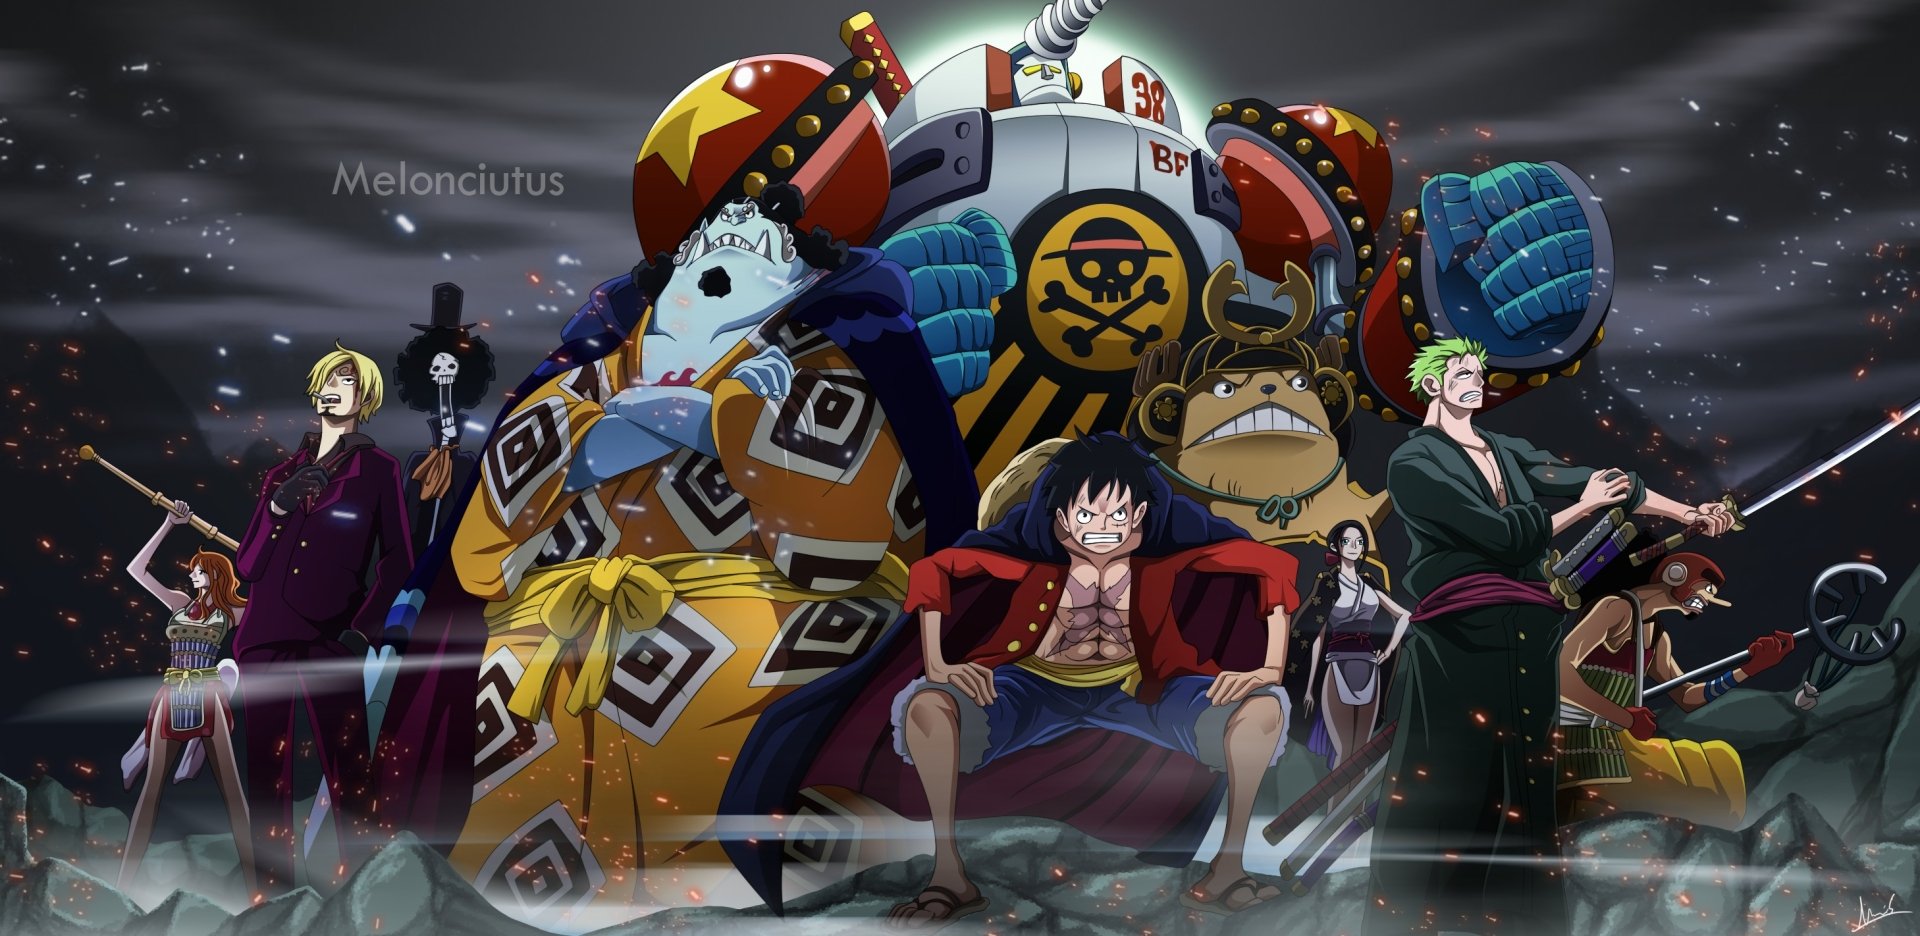 Straw Hat Crew HD Wallpaper by Melonciutus